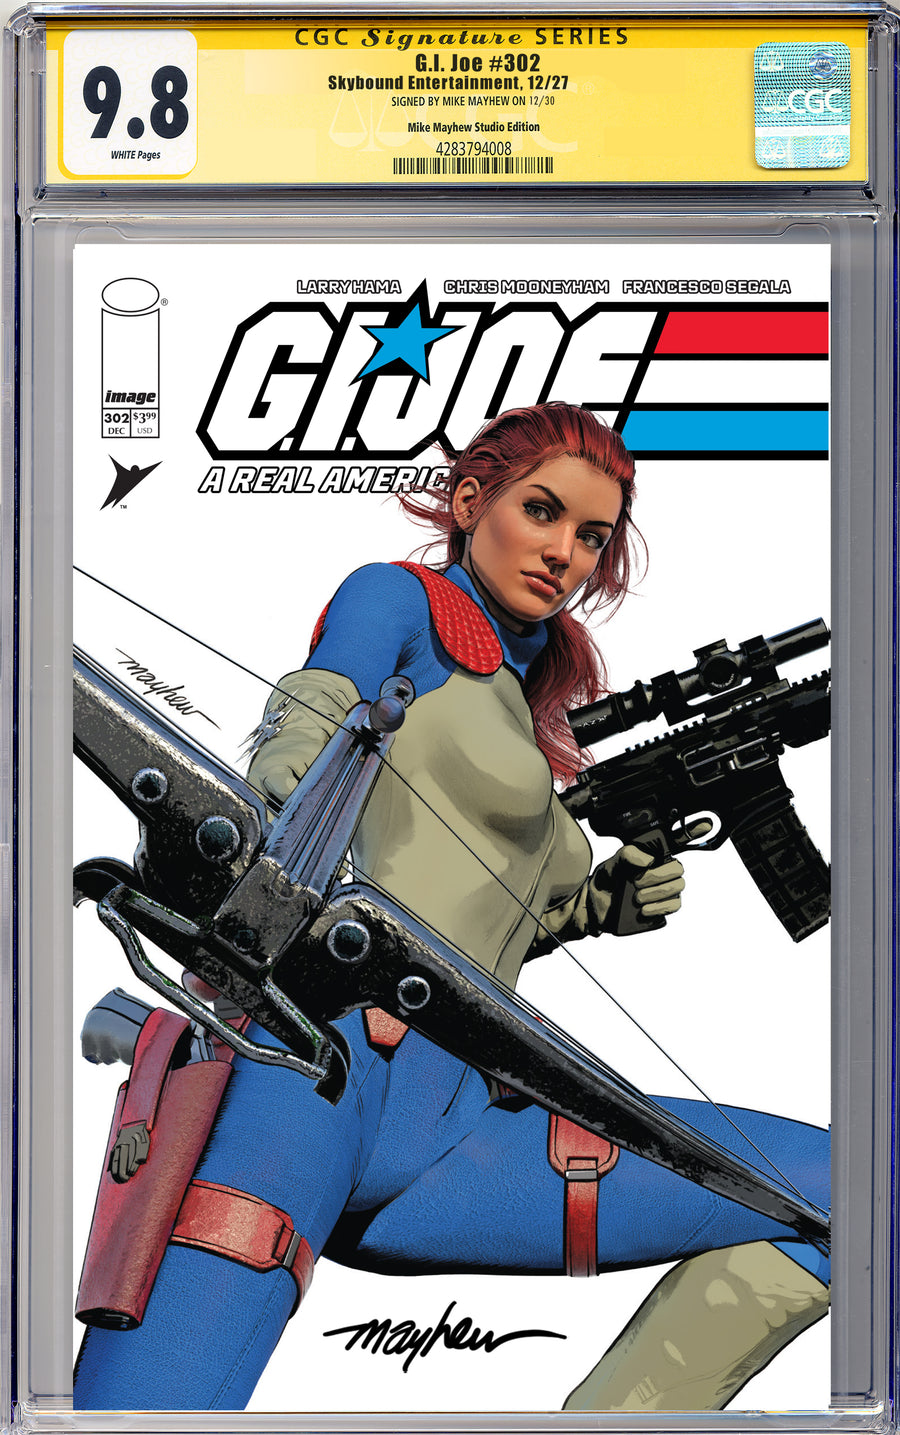 G.I. JOE: A REAL AMERICAN HERO #302 Mike Mayhew Studio Variant Cover A Trade Dress Regular Sig CGC Yellow Label 9.6 and Above Graded Slab